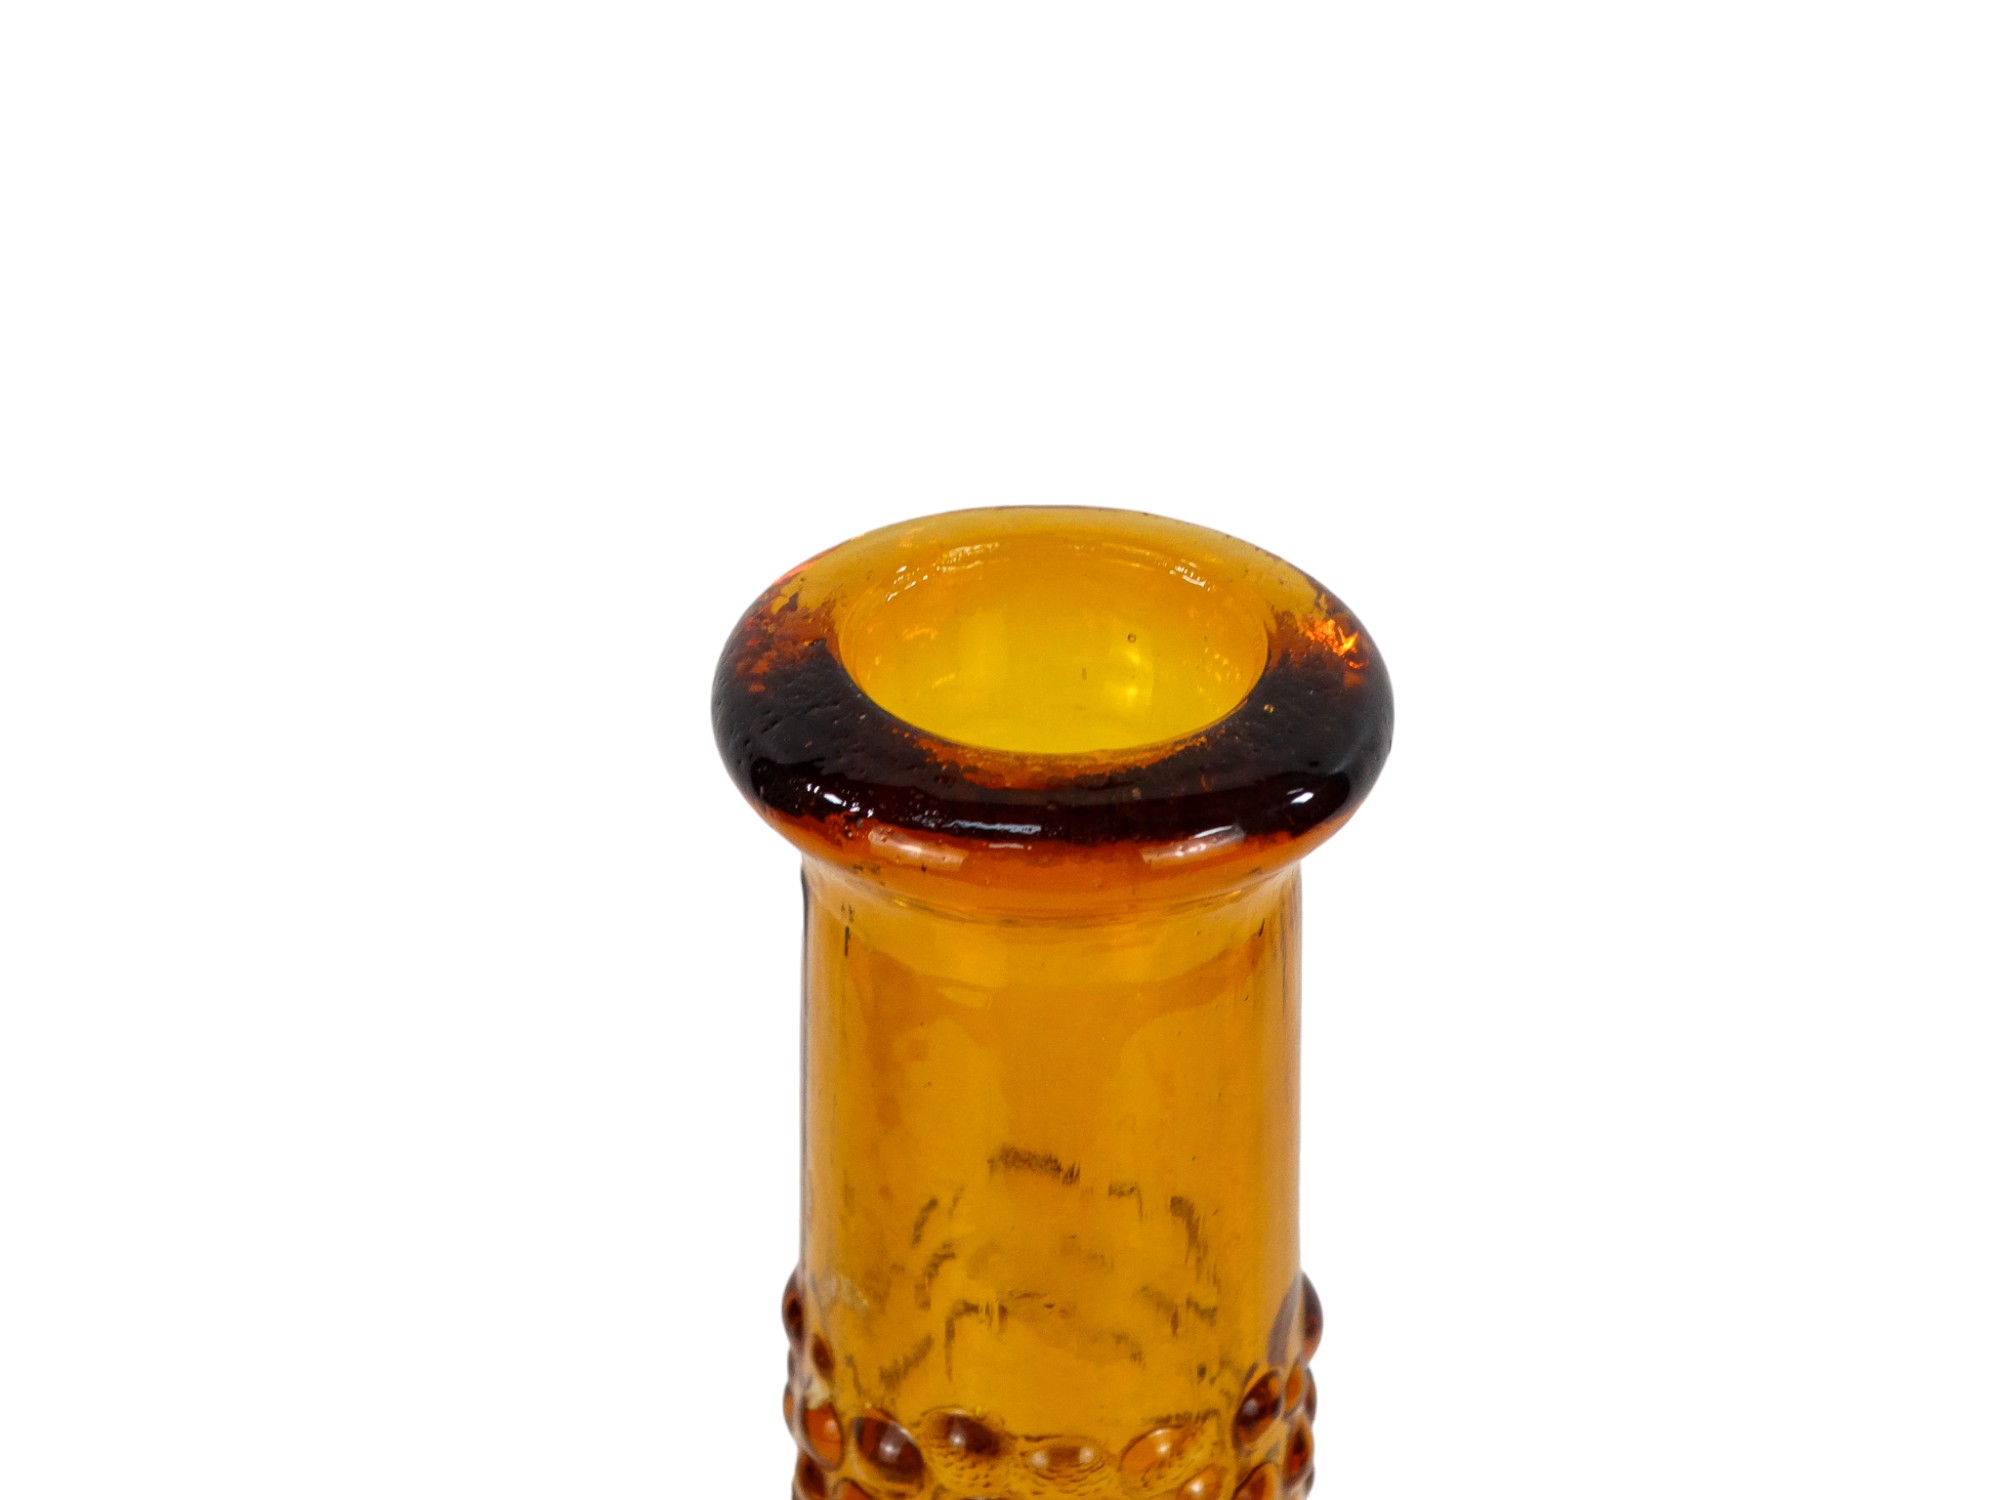 An Empoli genie bottle vase and stopper - amber with blister decoration, 57cm high - Image 4 of 6